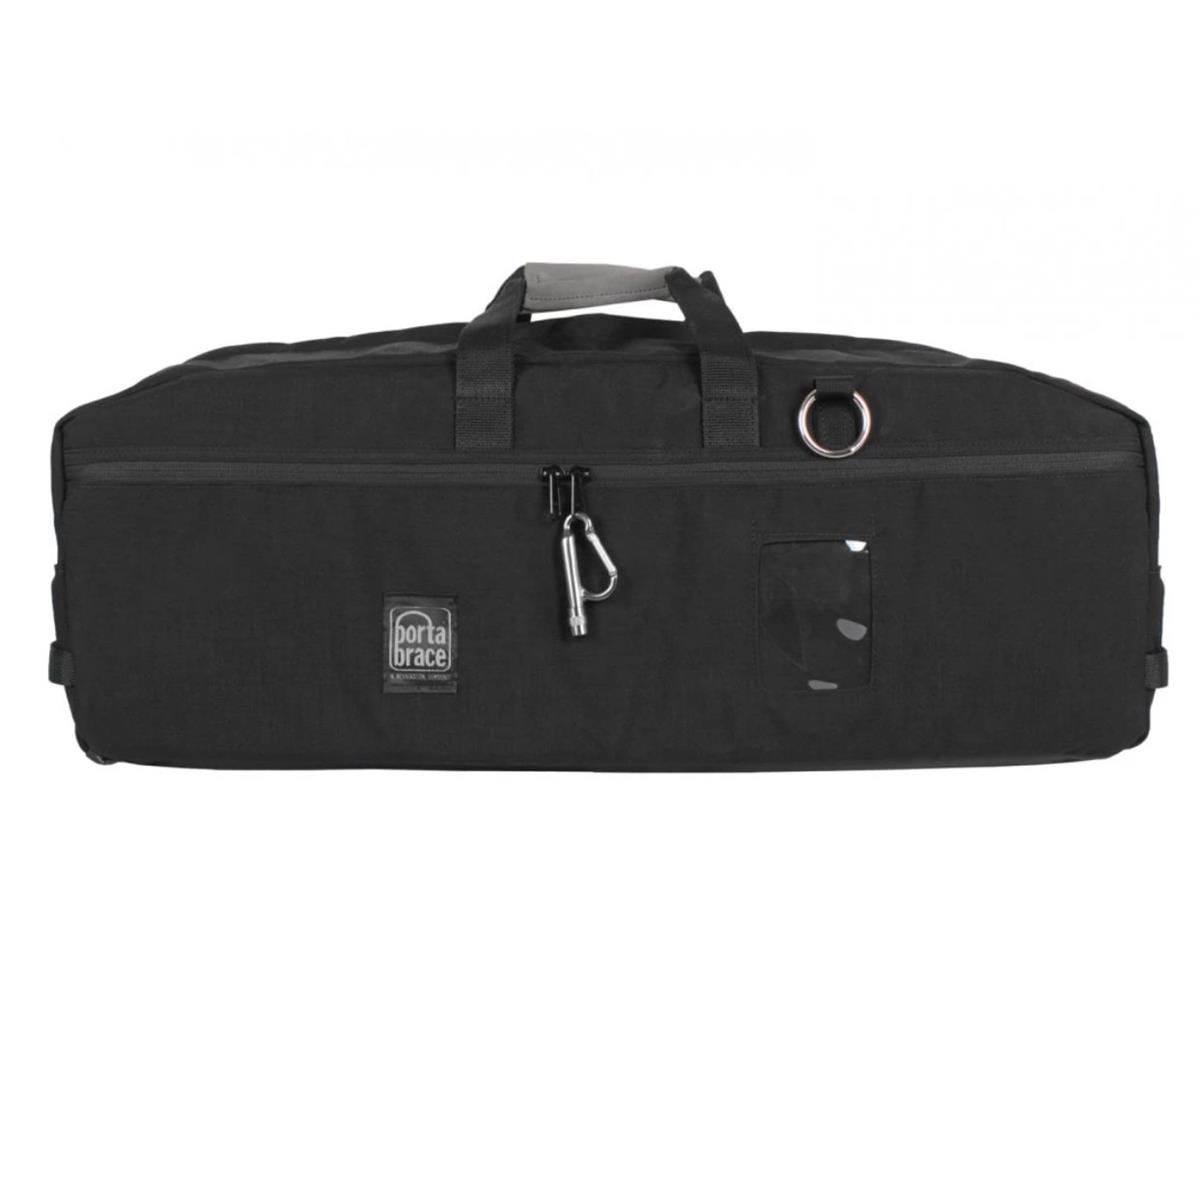 Image of Porta Brace Carrying Case for Glidecam Devin Graham Hand-Held Stabilizer